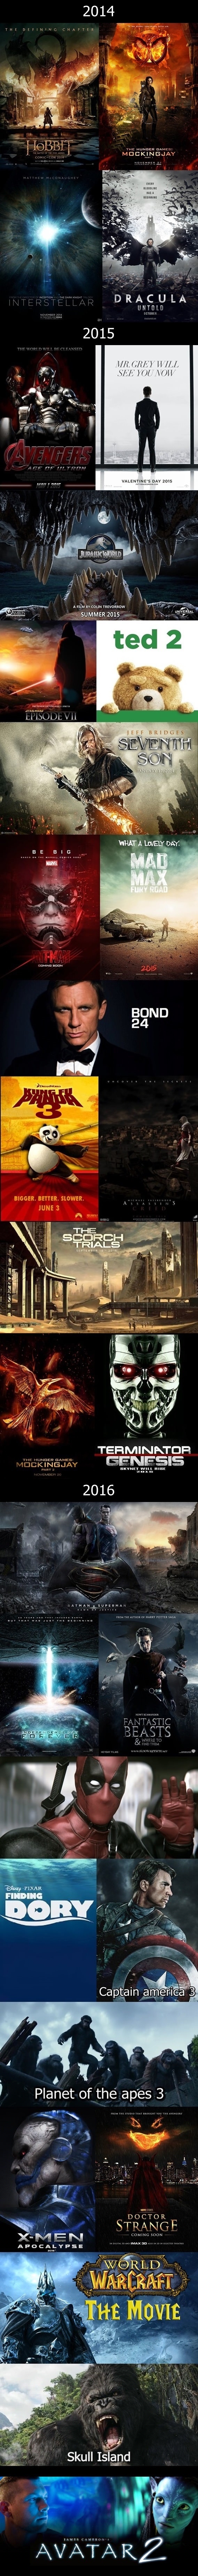 Some awesome movies